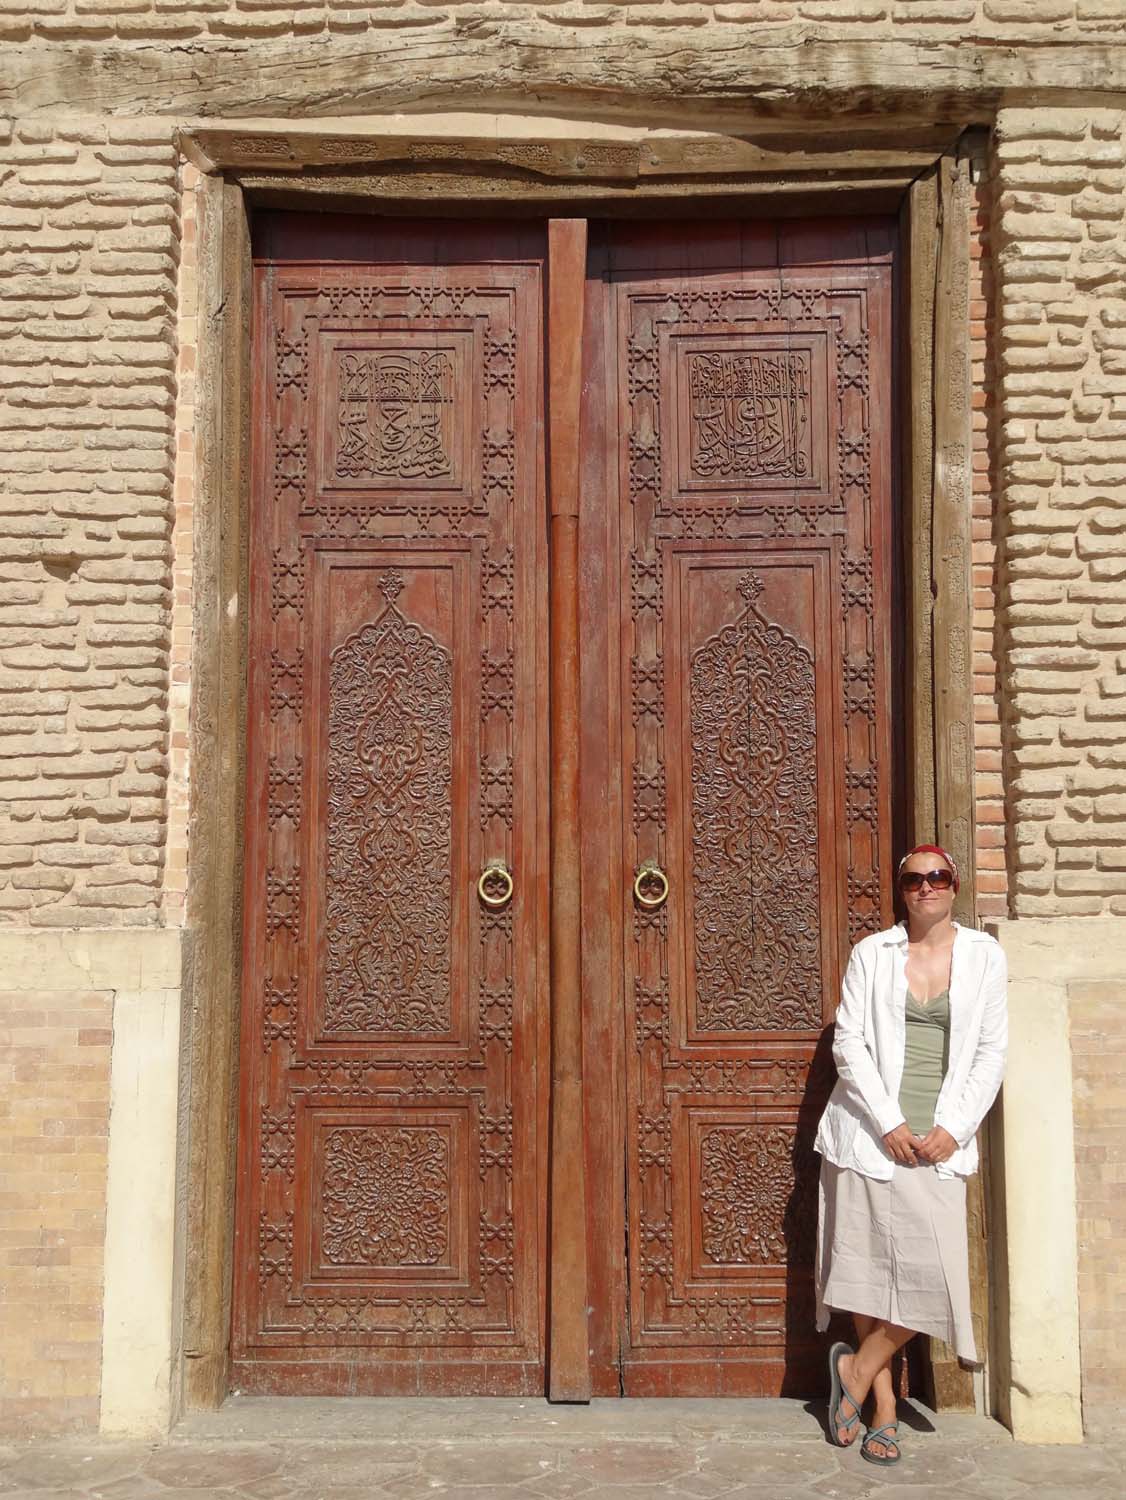 covering up for the first time to visit the mausoleum - beautiful carved doors